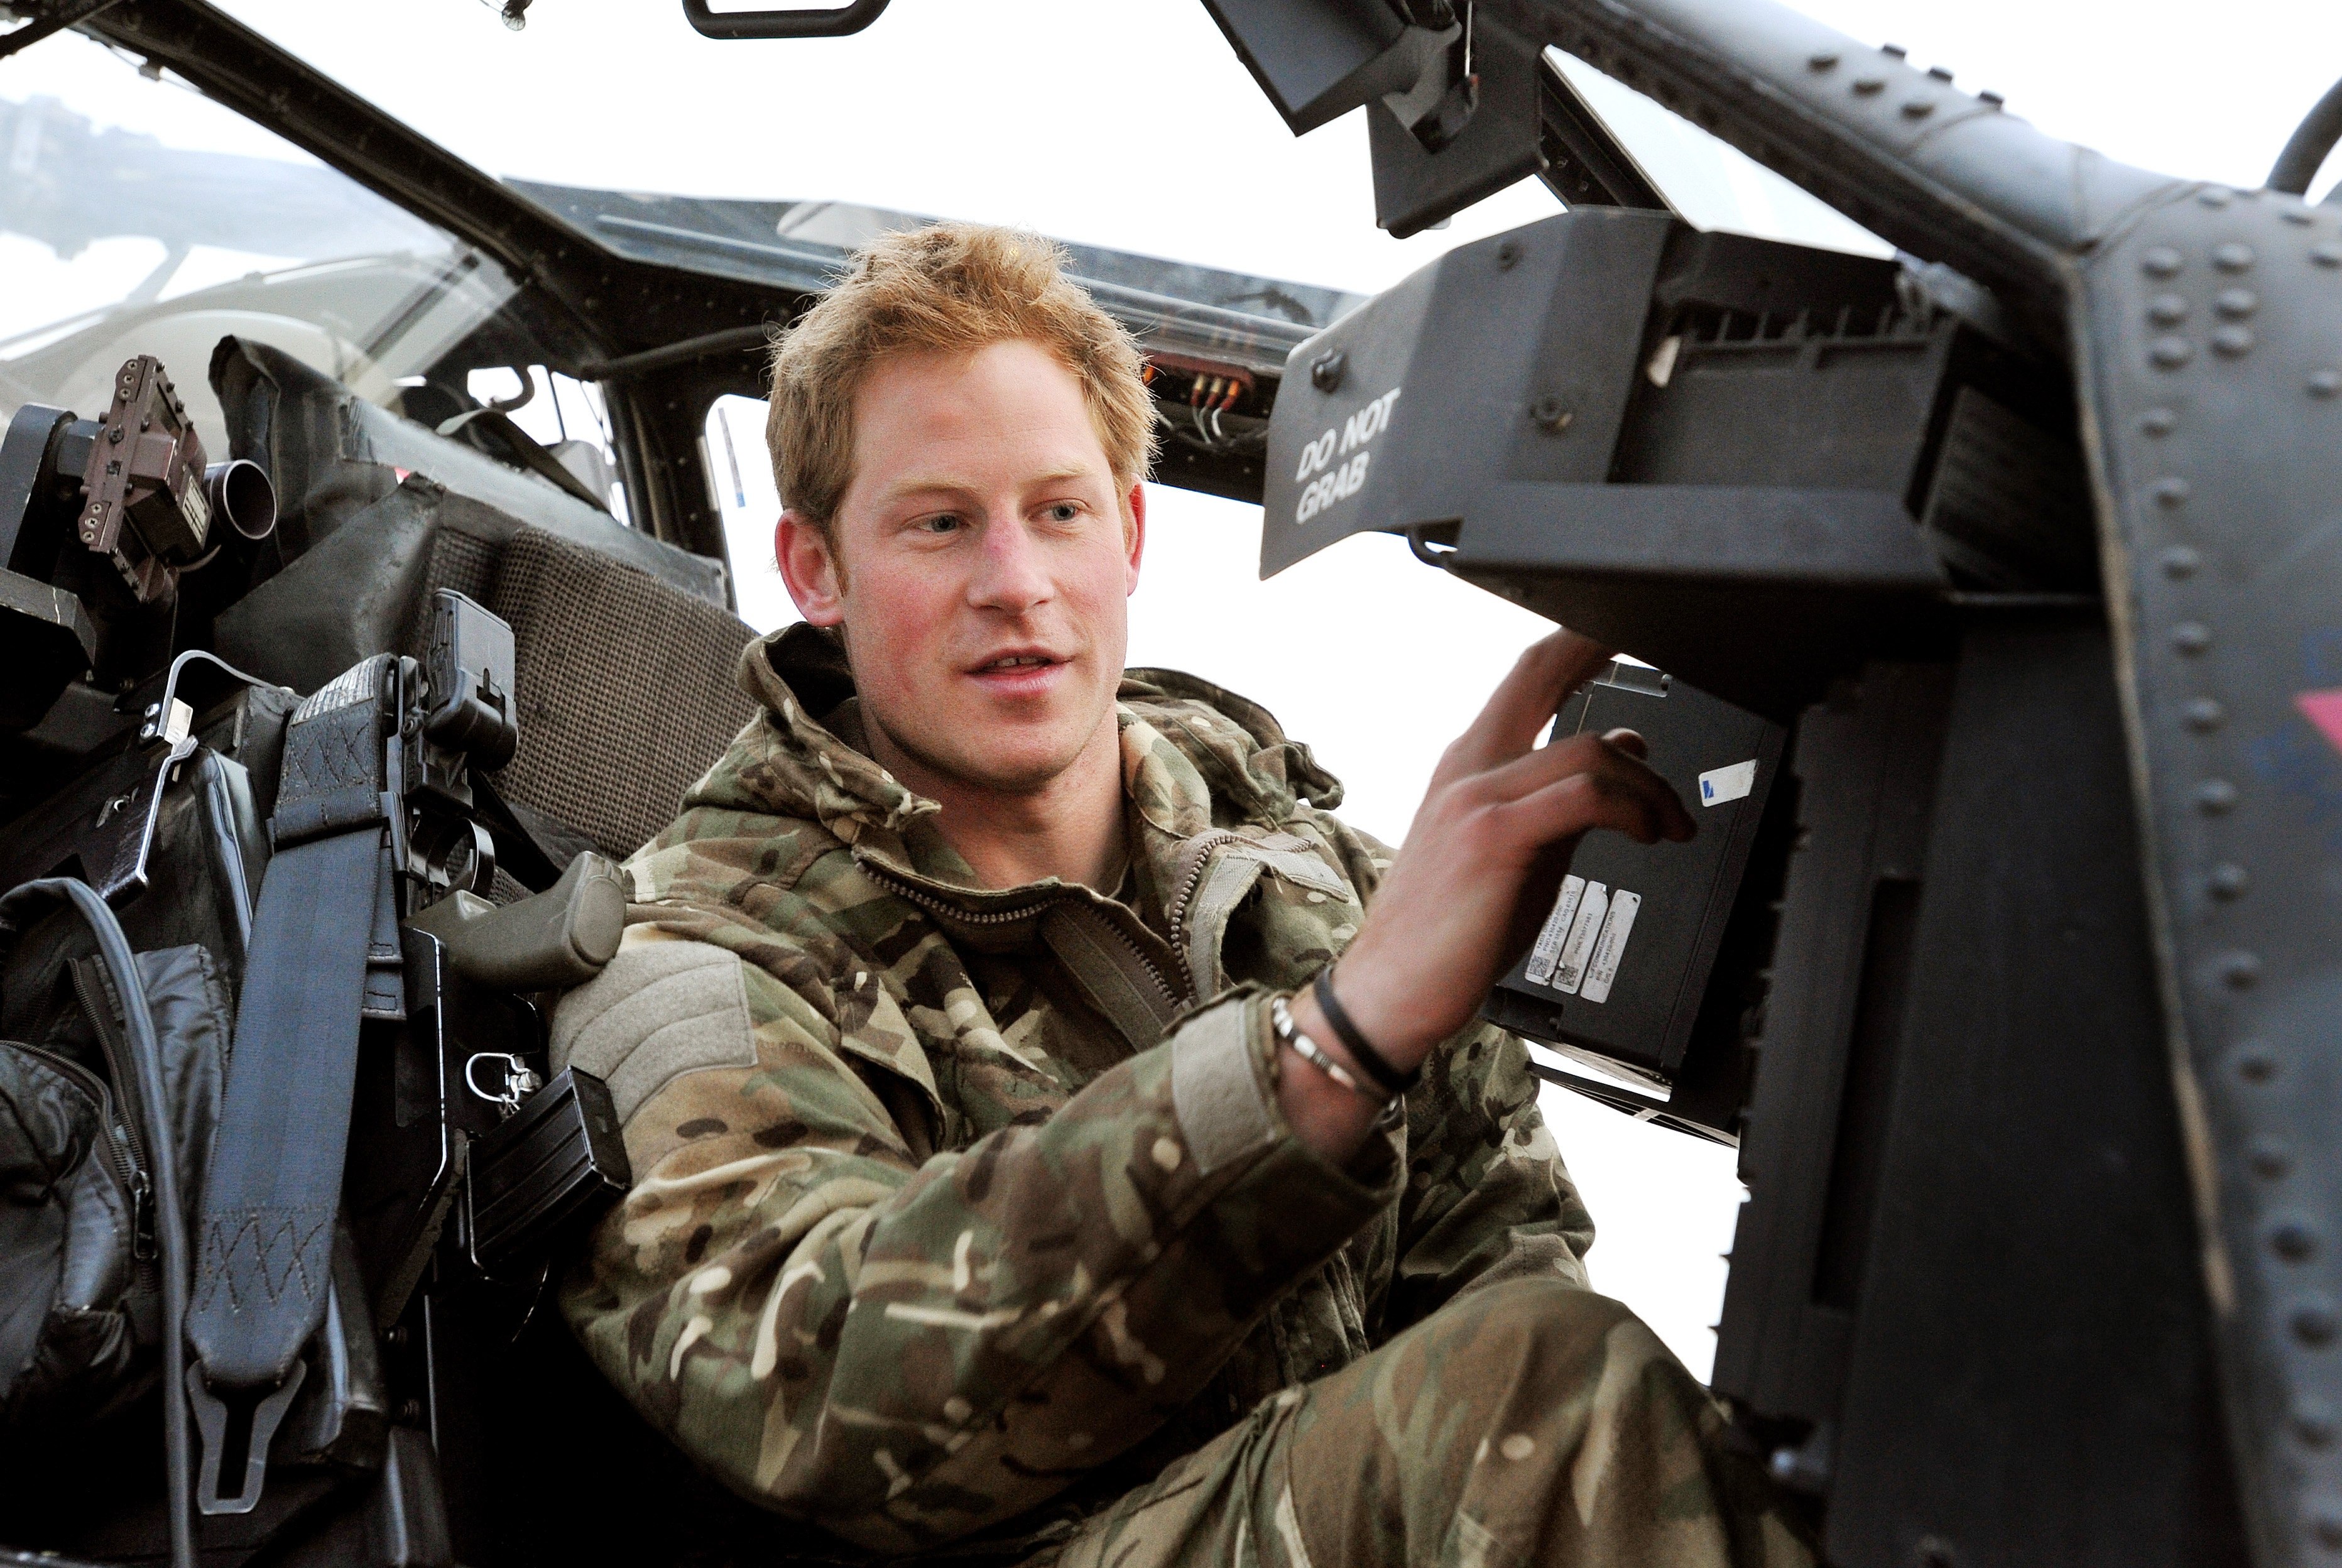 Prince Harry at the British controlled flight-line at Camp Bastion in Afghanistan’s Helmand Province in 2012, where he was serving as an Apache helicopter pilot/gunner. Photo: AFP 